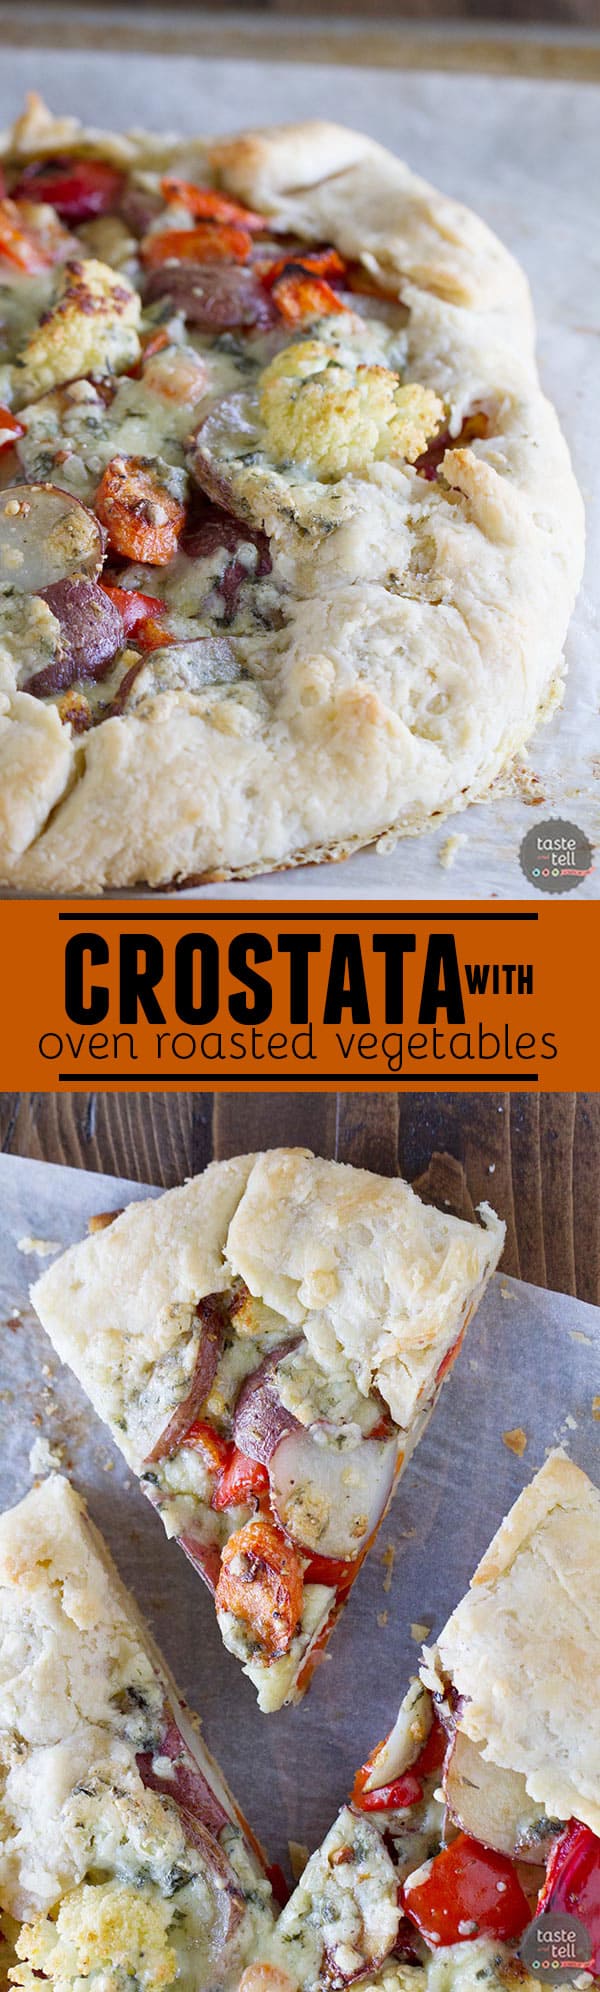 A great way to clear out the vegetable bin in your refrigerator, this Crostata with Oven Roasted Vegetables is a filling recipe that is packed with flavor.